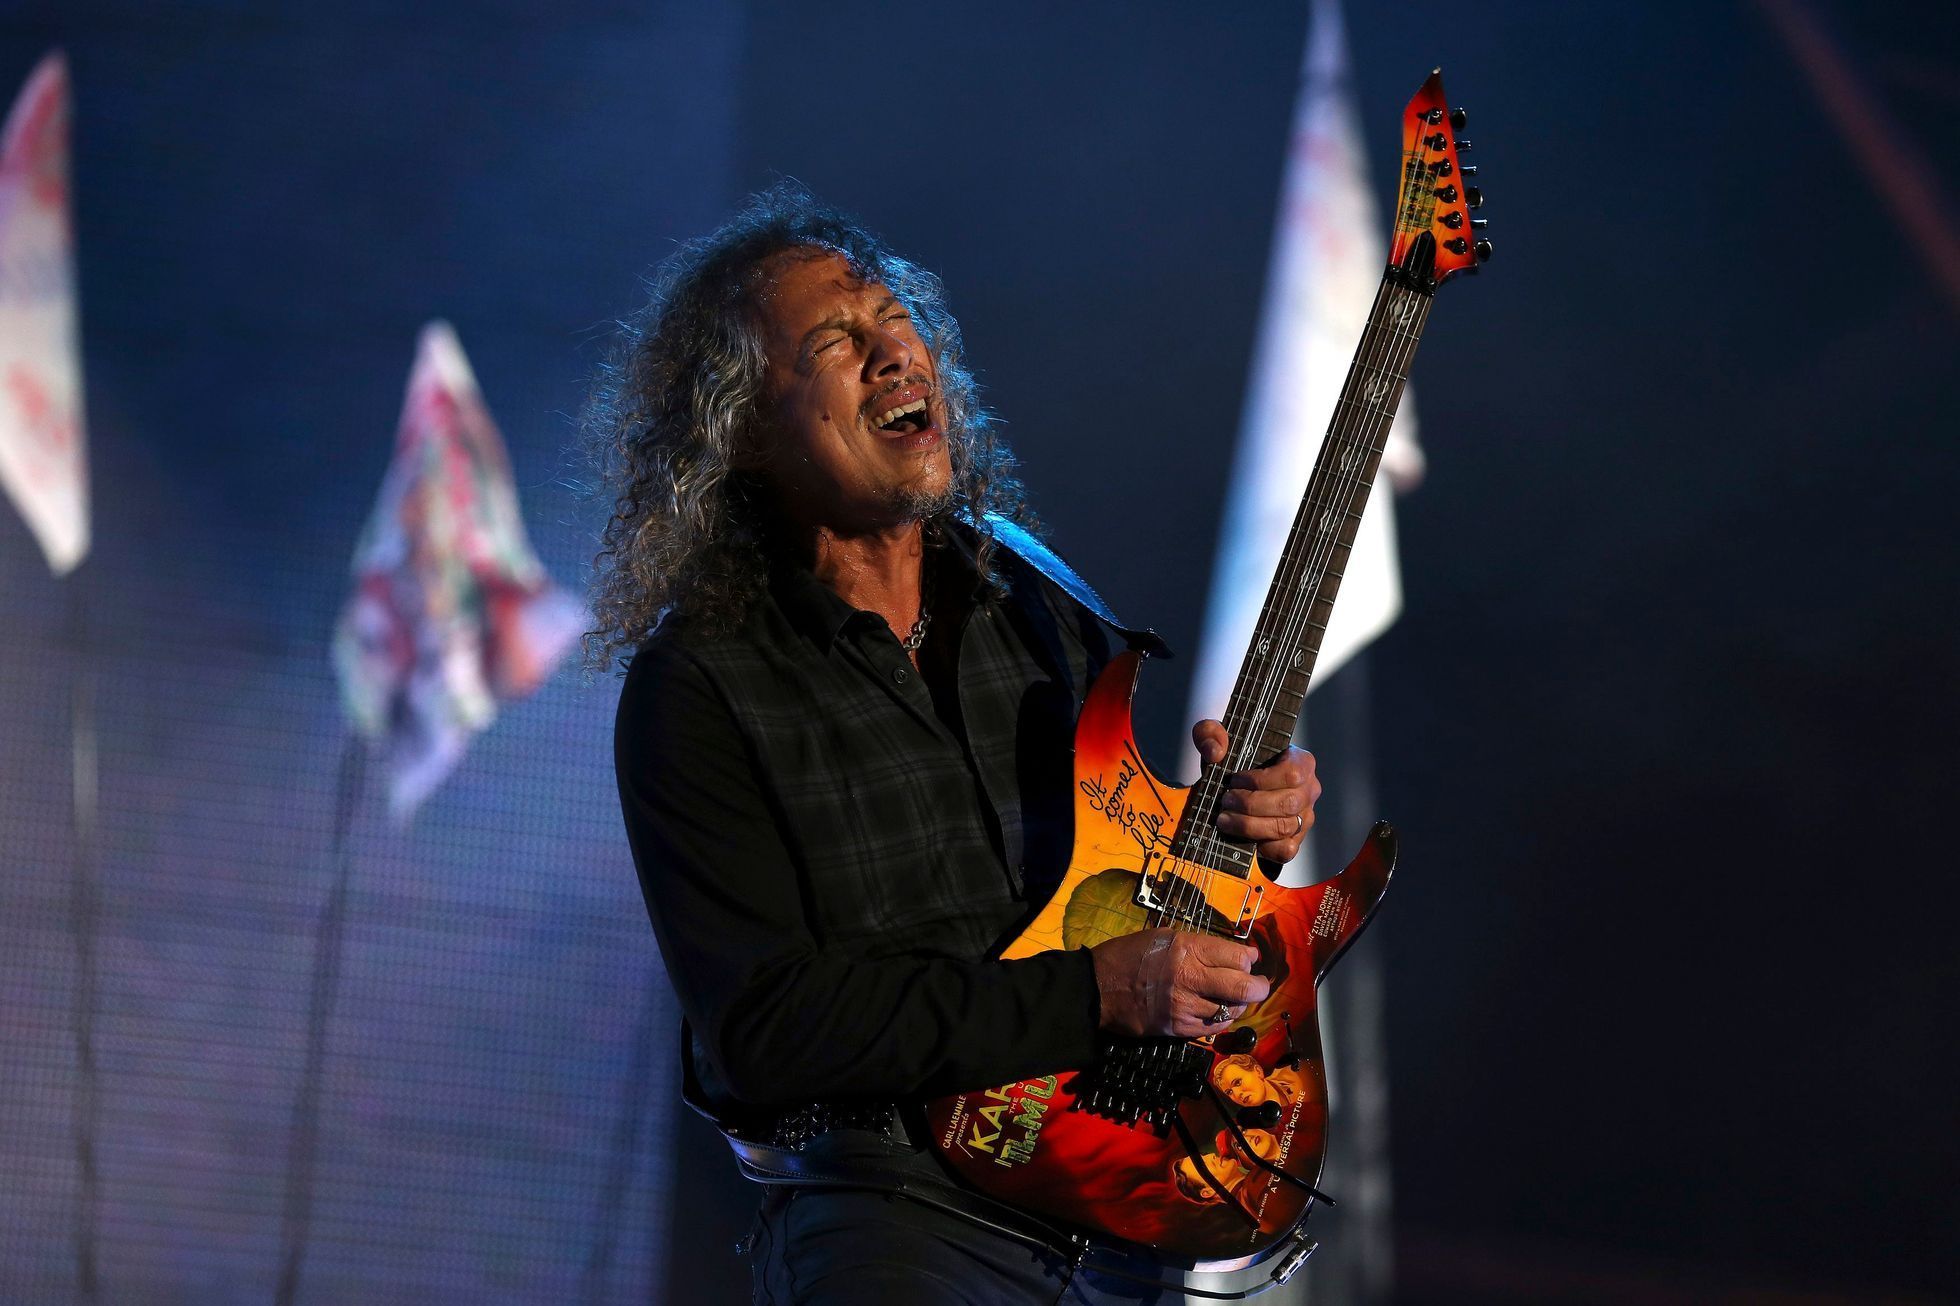 Hammett of Metallica performs on the Pyramid Stage at Worthy Farm in Somerset, during the Glastonbury Festival